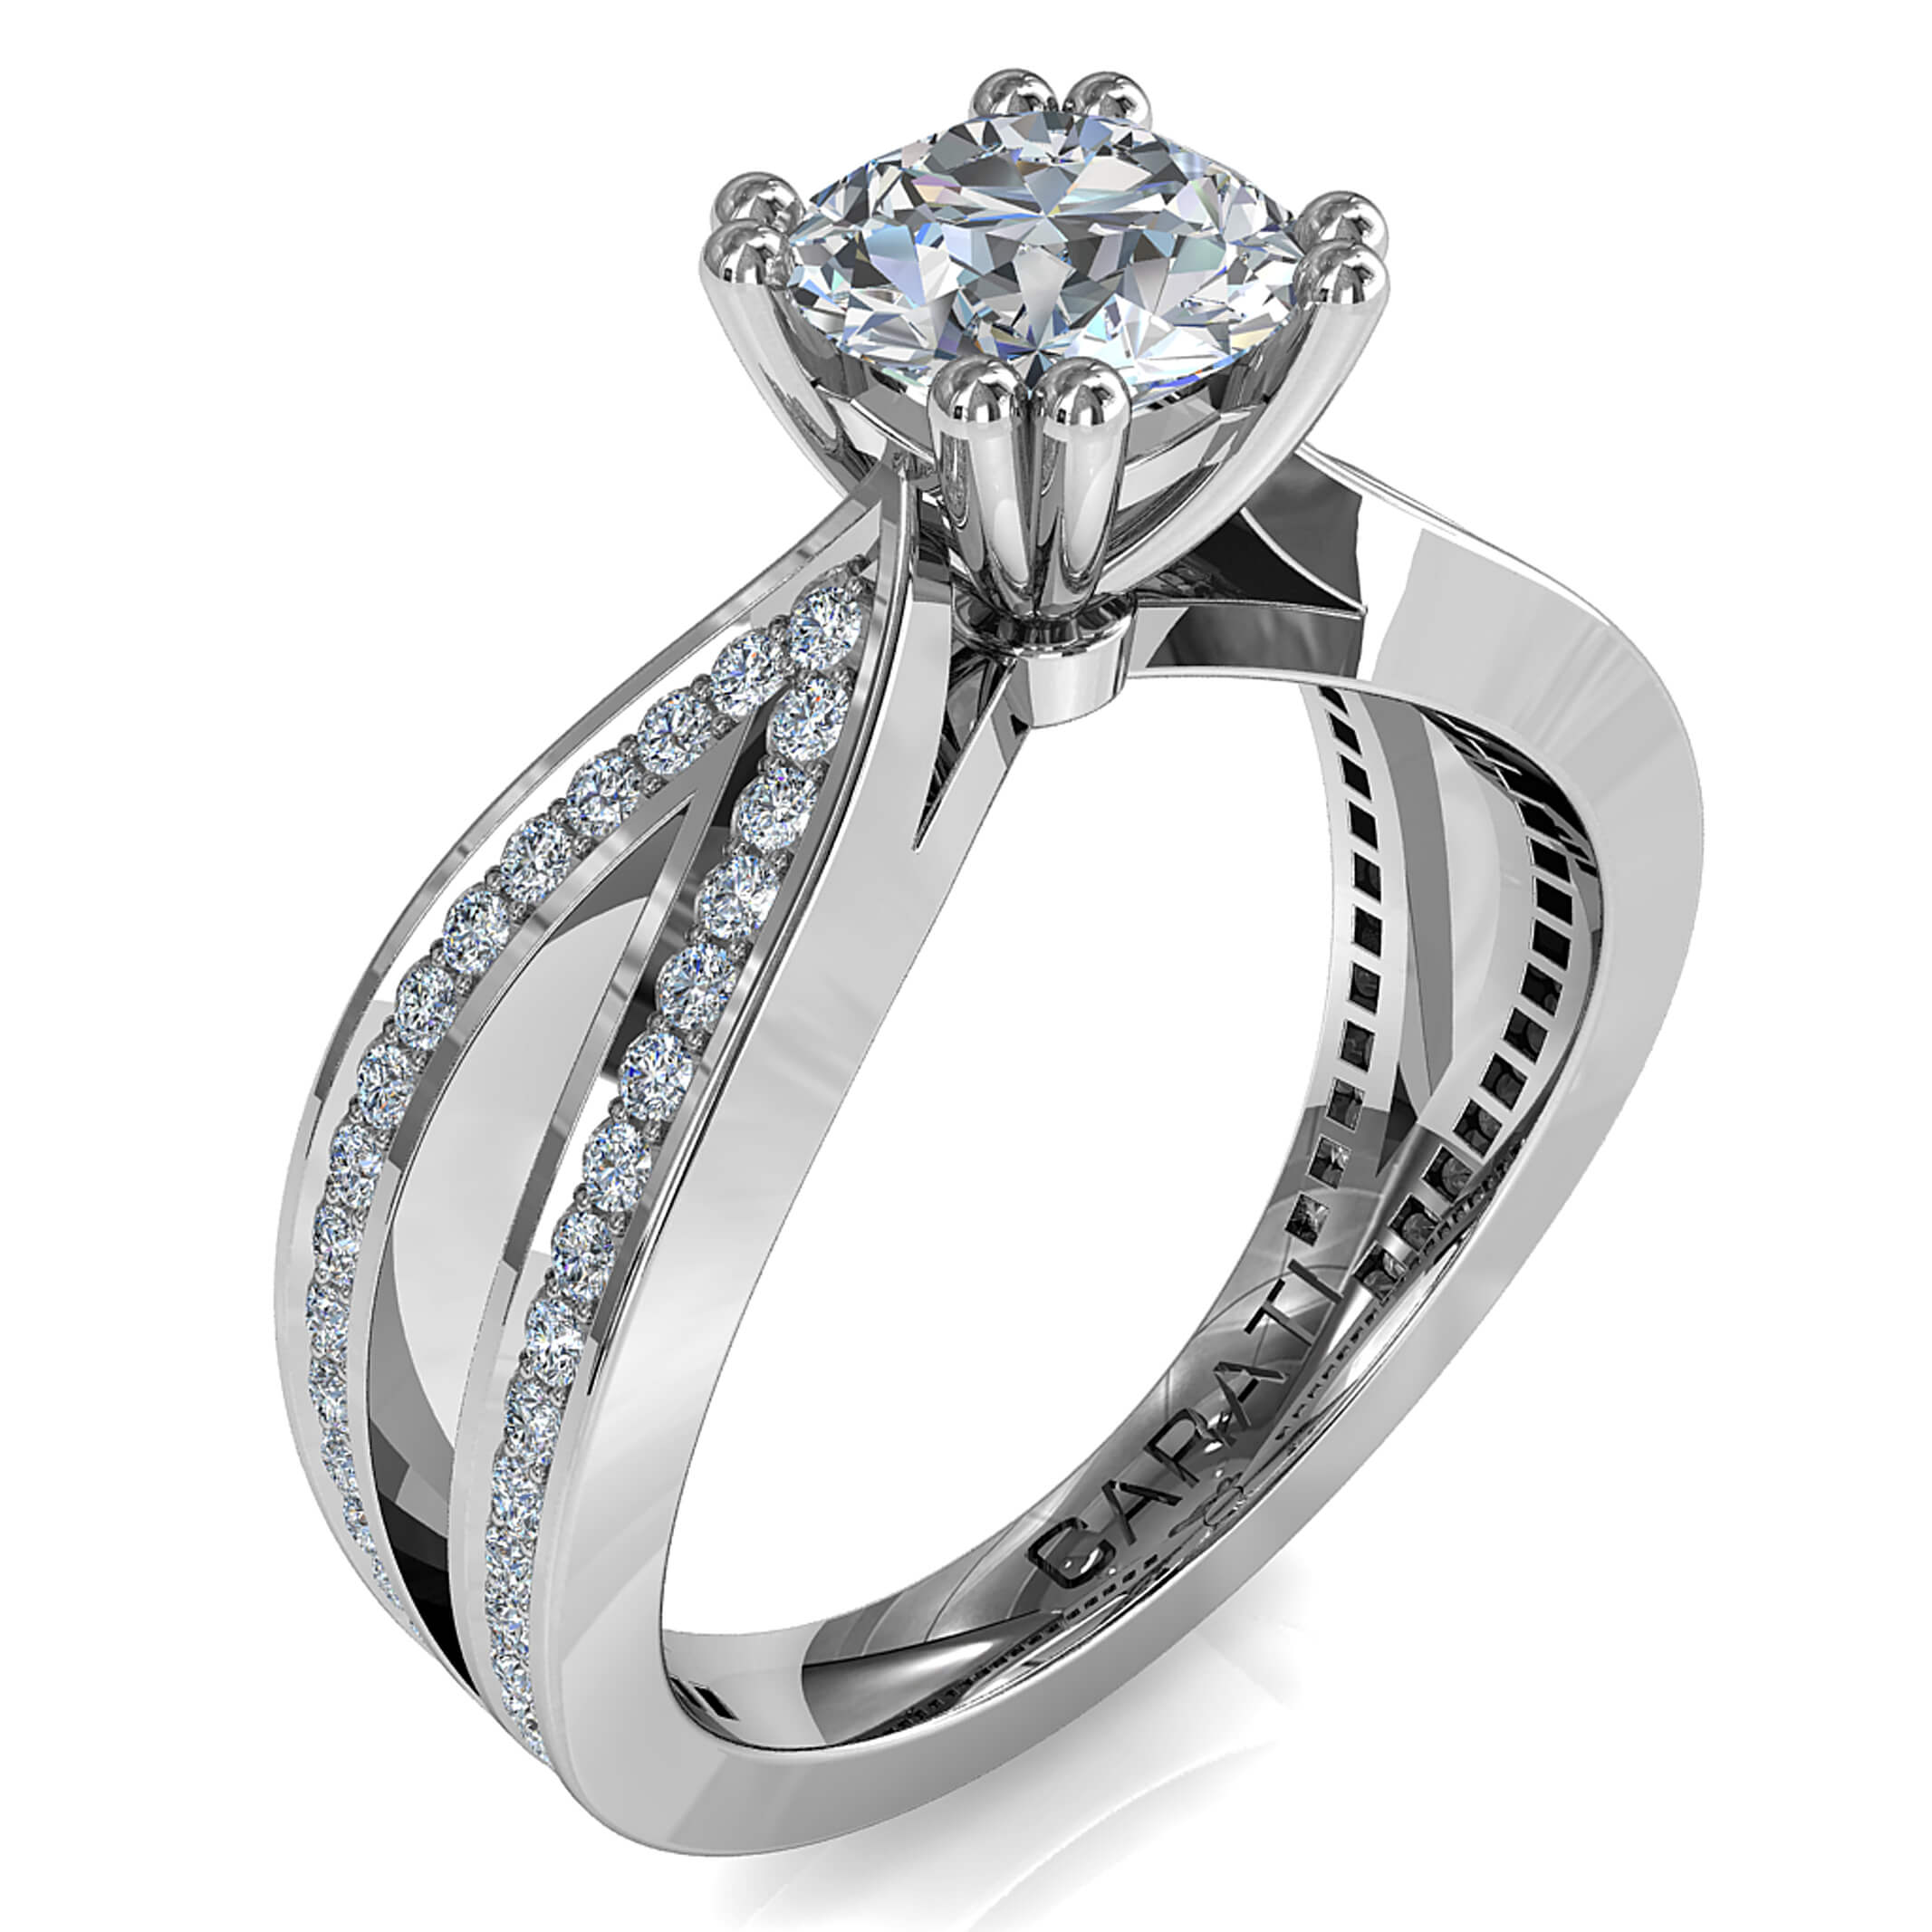 Round Brilliant Cut Diamond Solitaire Engagement Ring, 4 Double Claw Set on a Bead Set Bow Shaped Band.